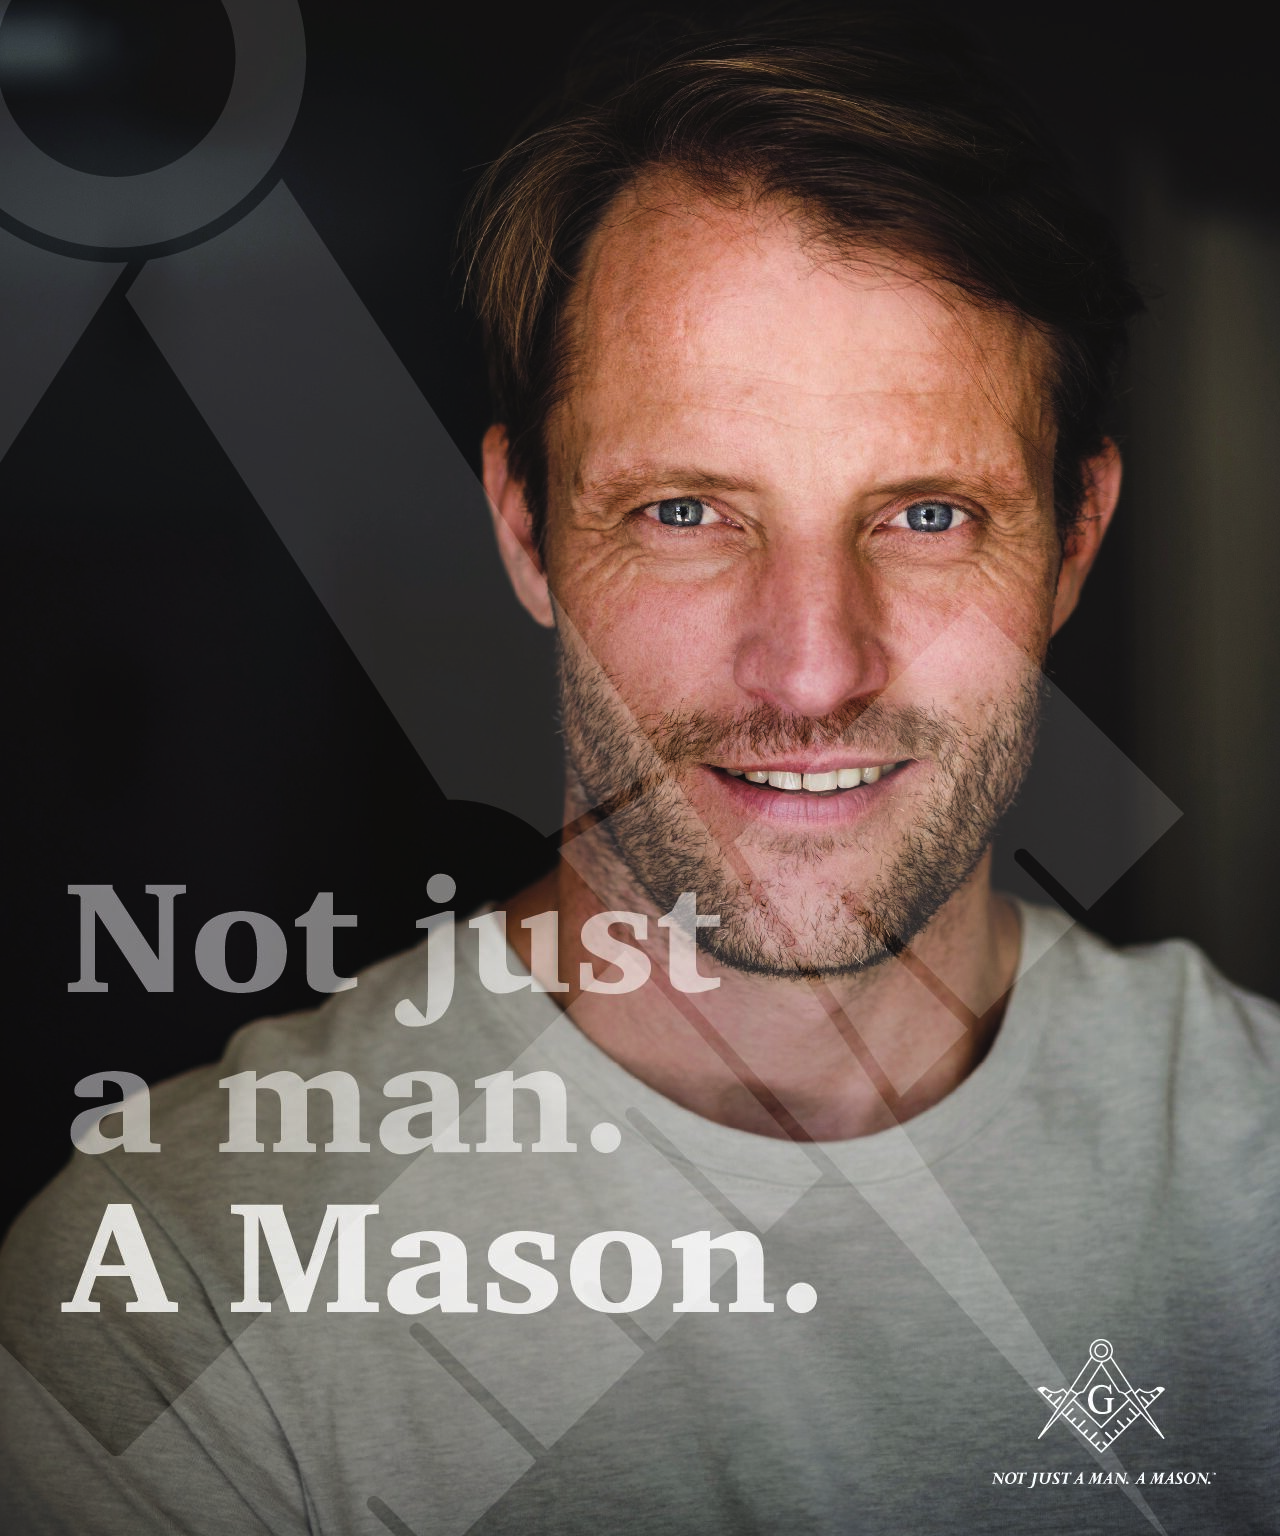 Not Just A Man Campaign